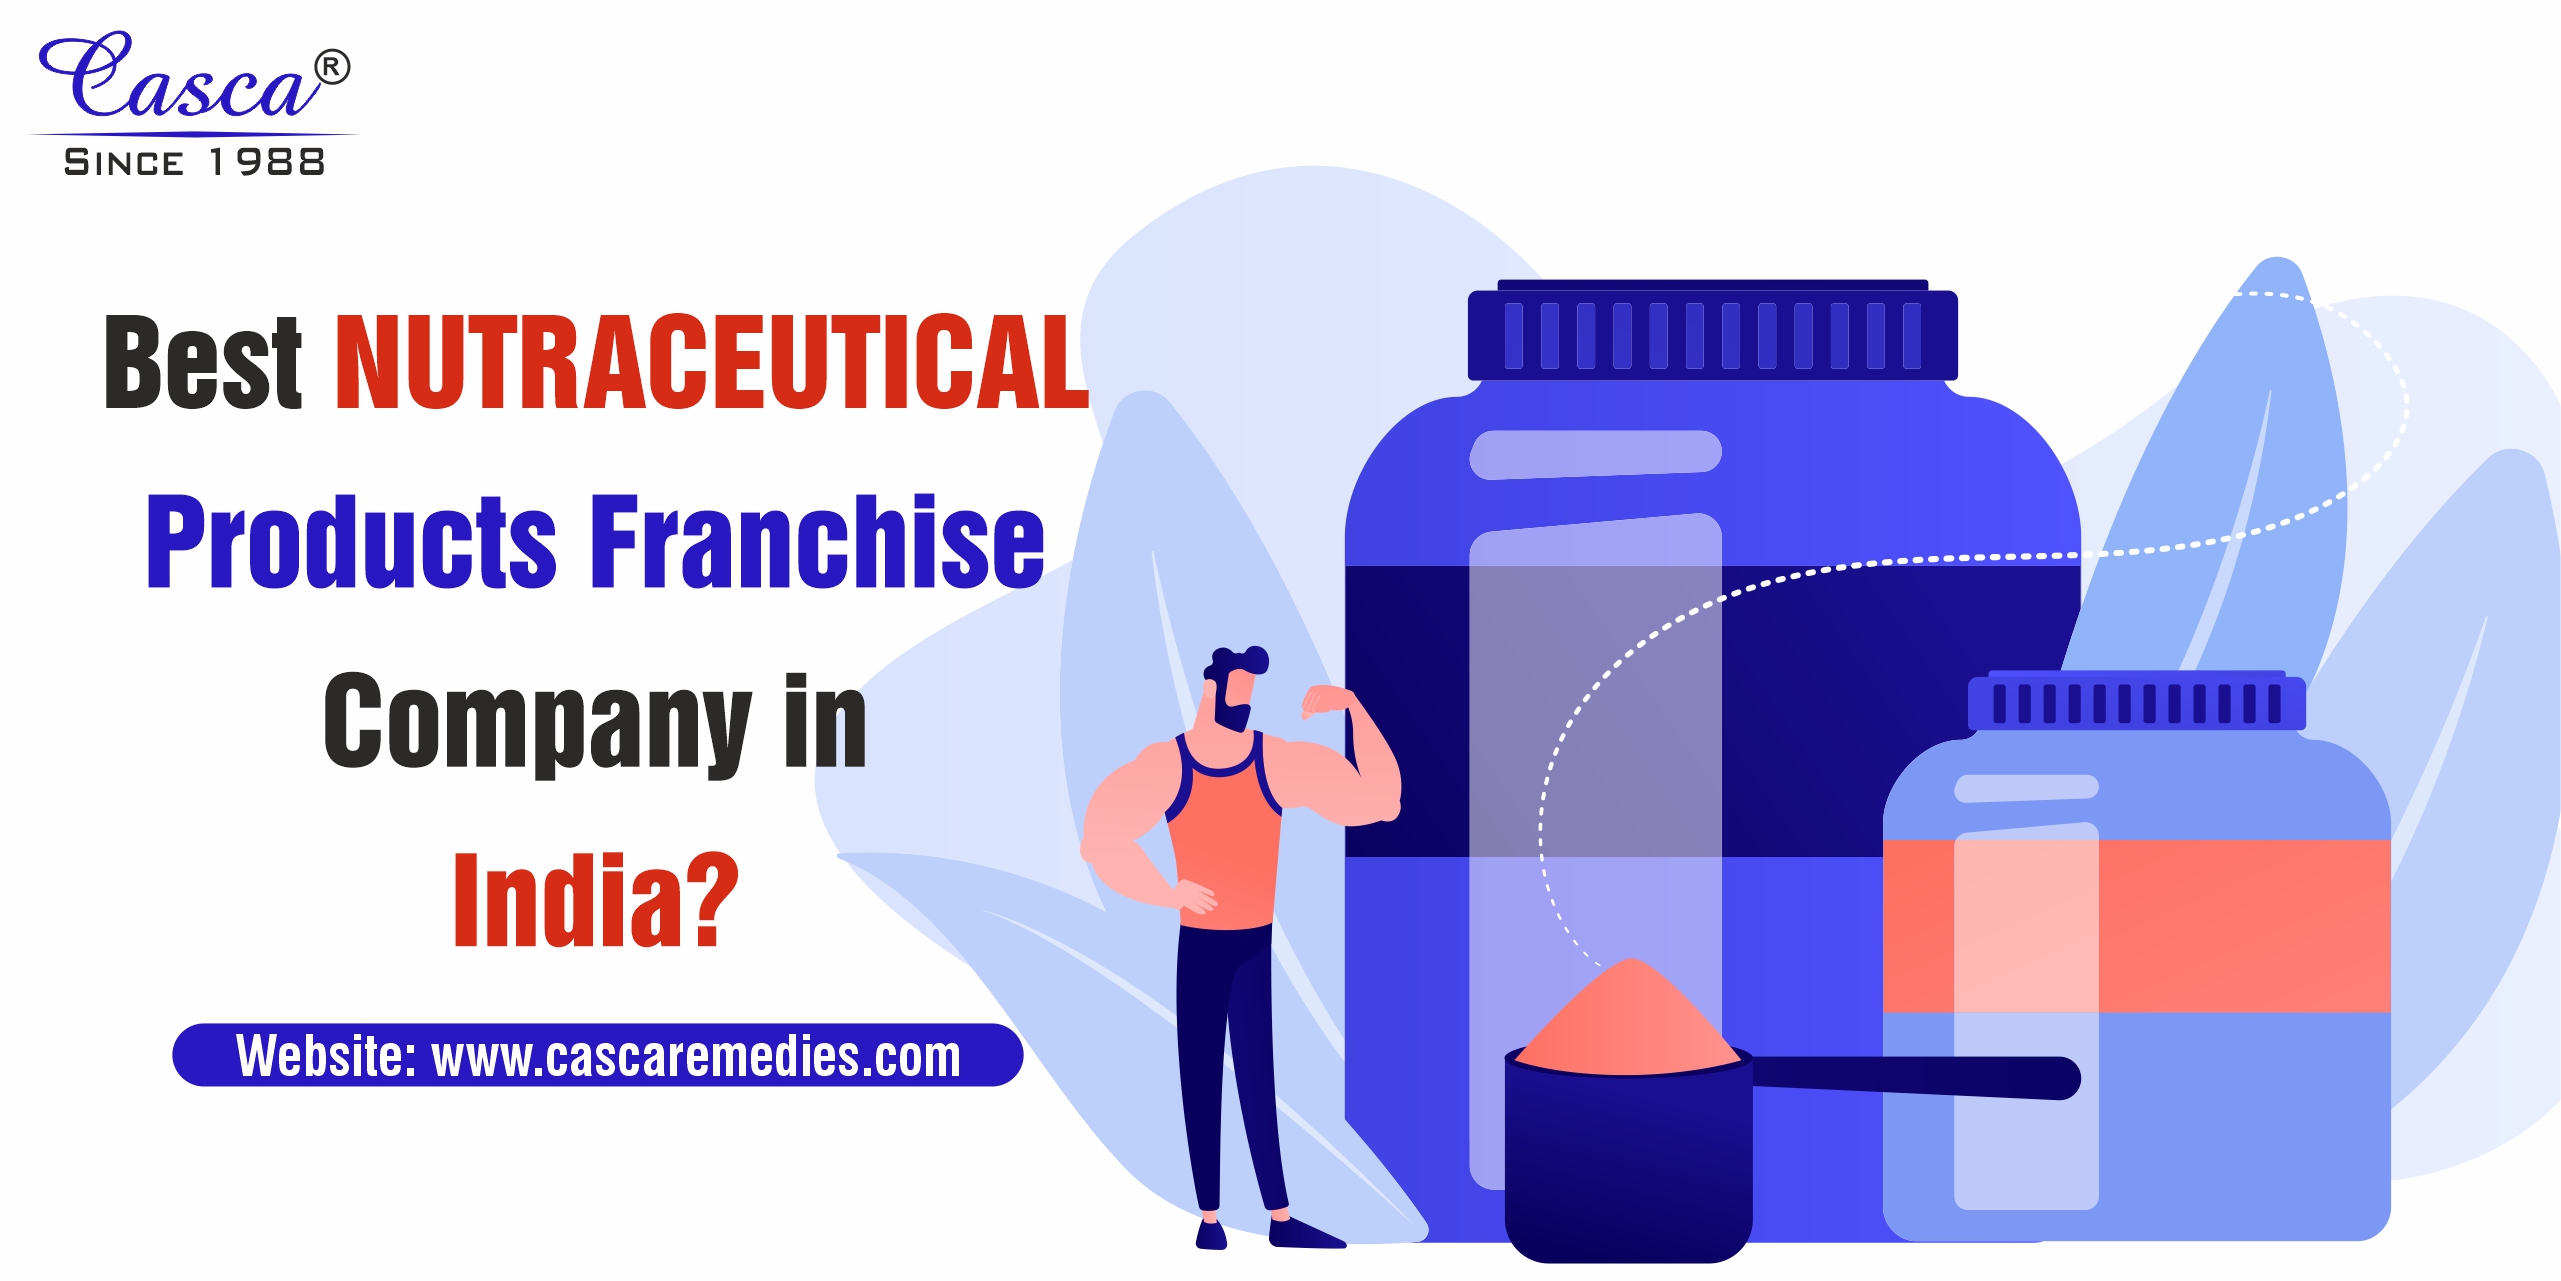 Best-Nutraceutical-products-franchise-company-in-India